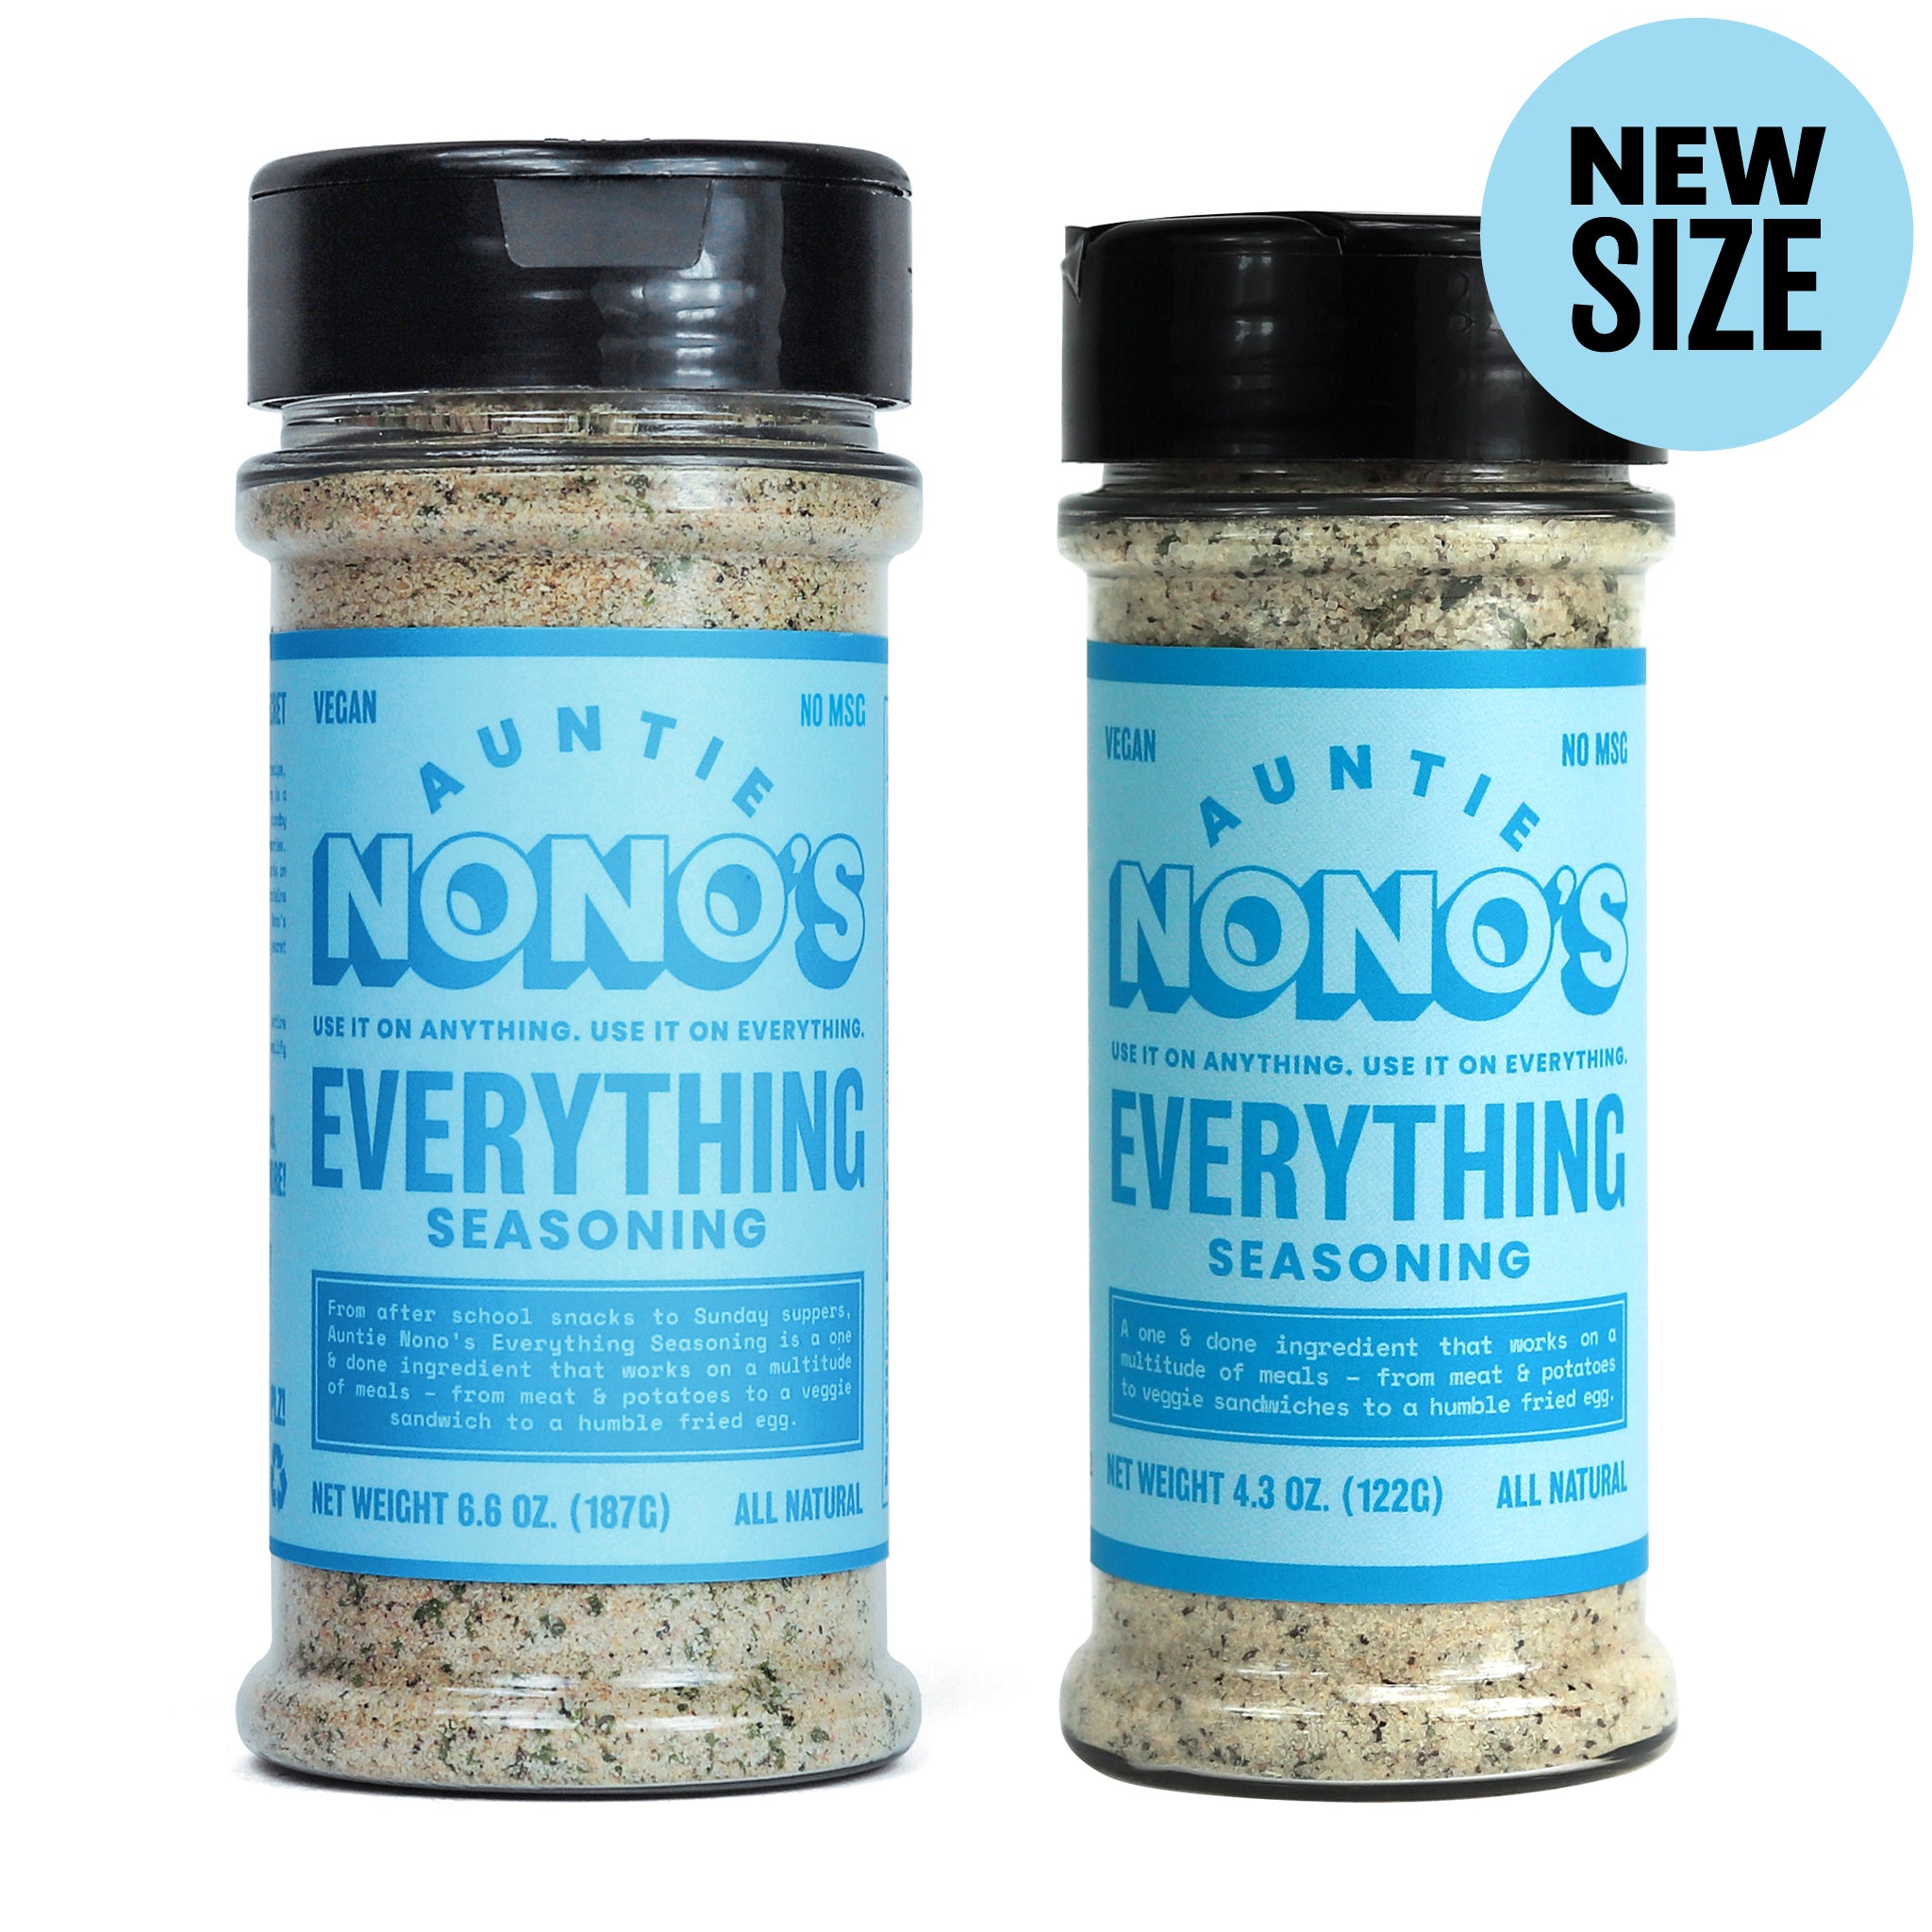 Auntie Nono's Everything Seasoning is the BEST way to make a quick din